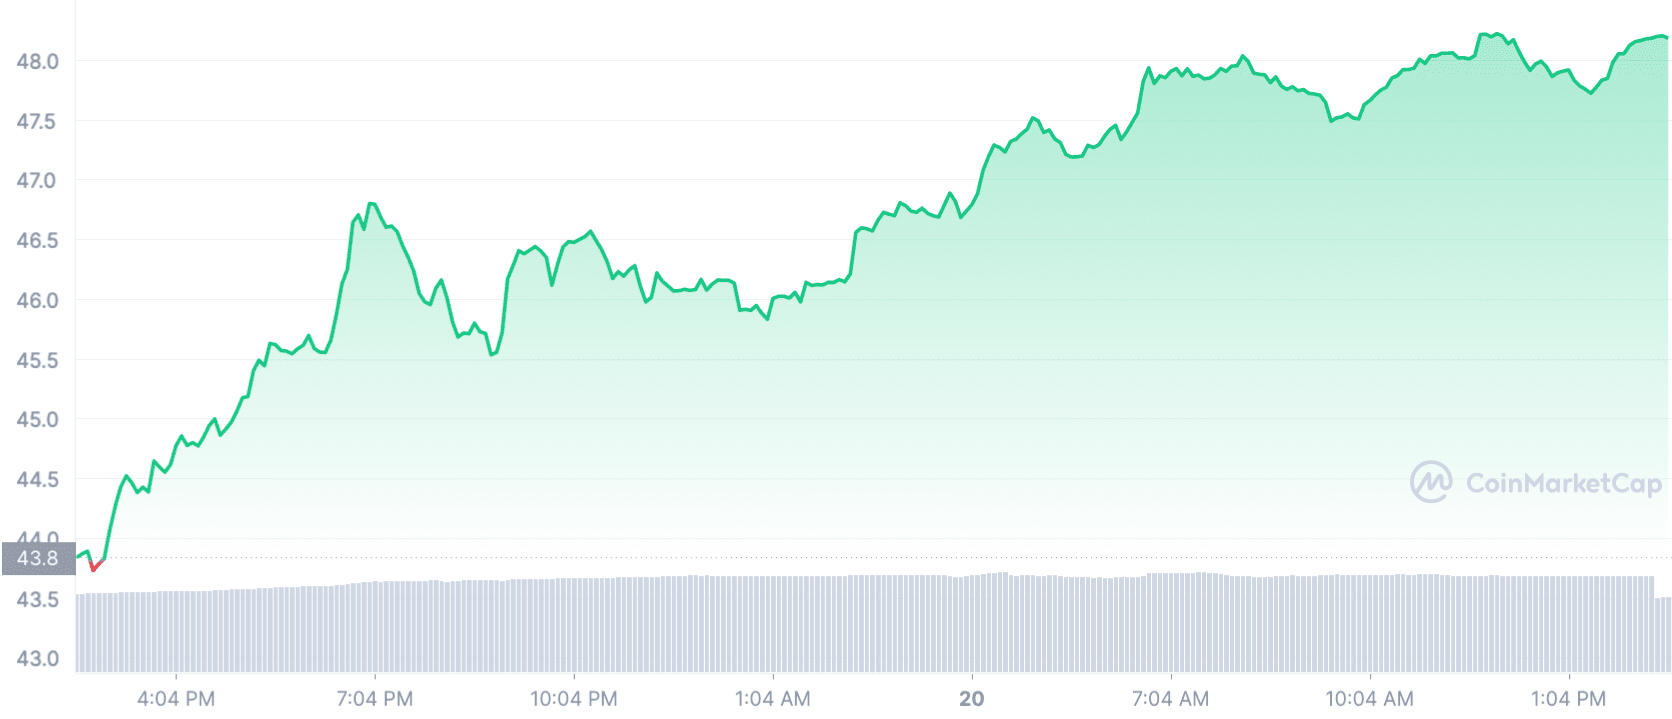 FTT token price performance in the past 24 hours